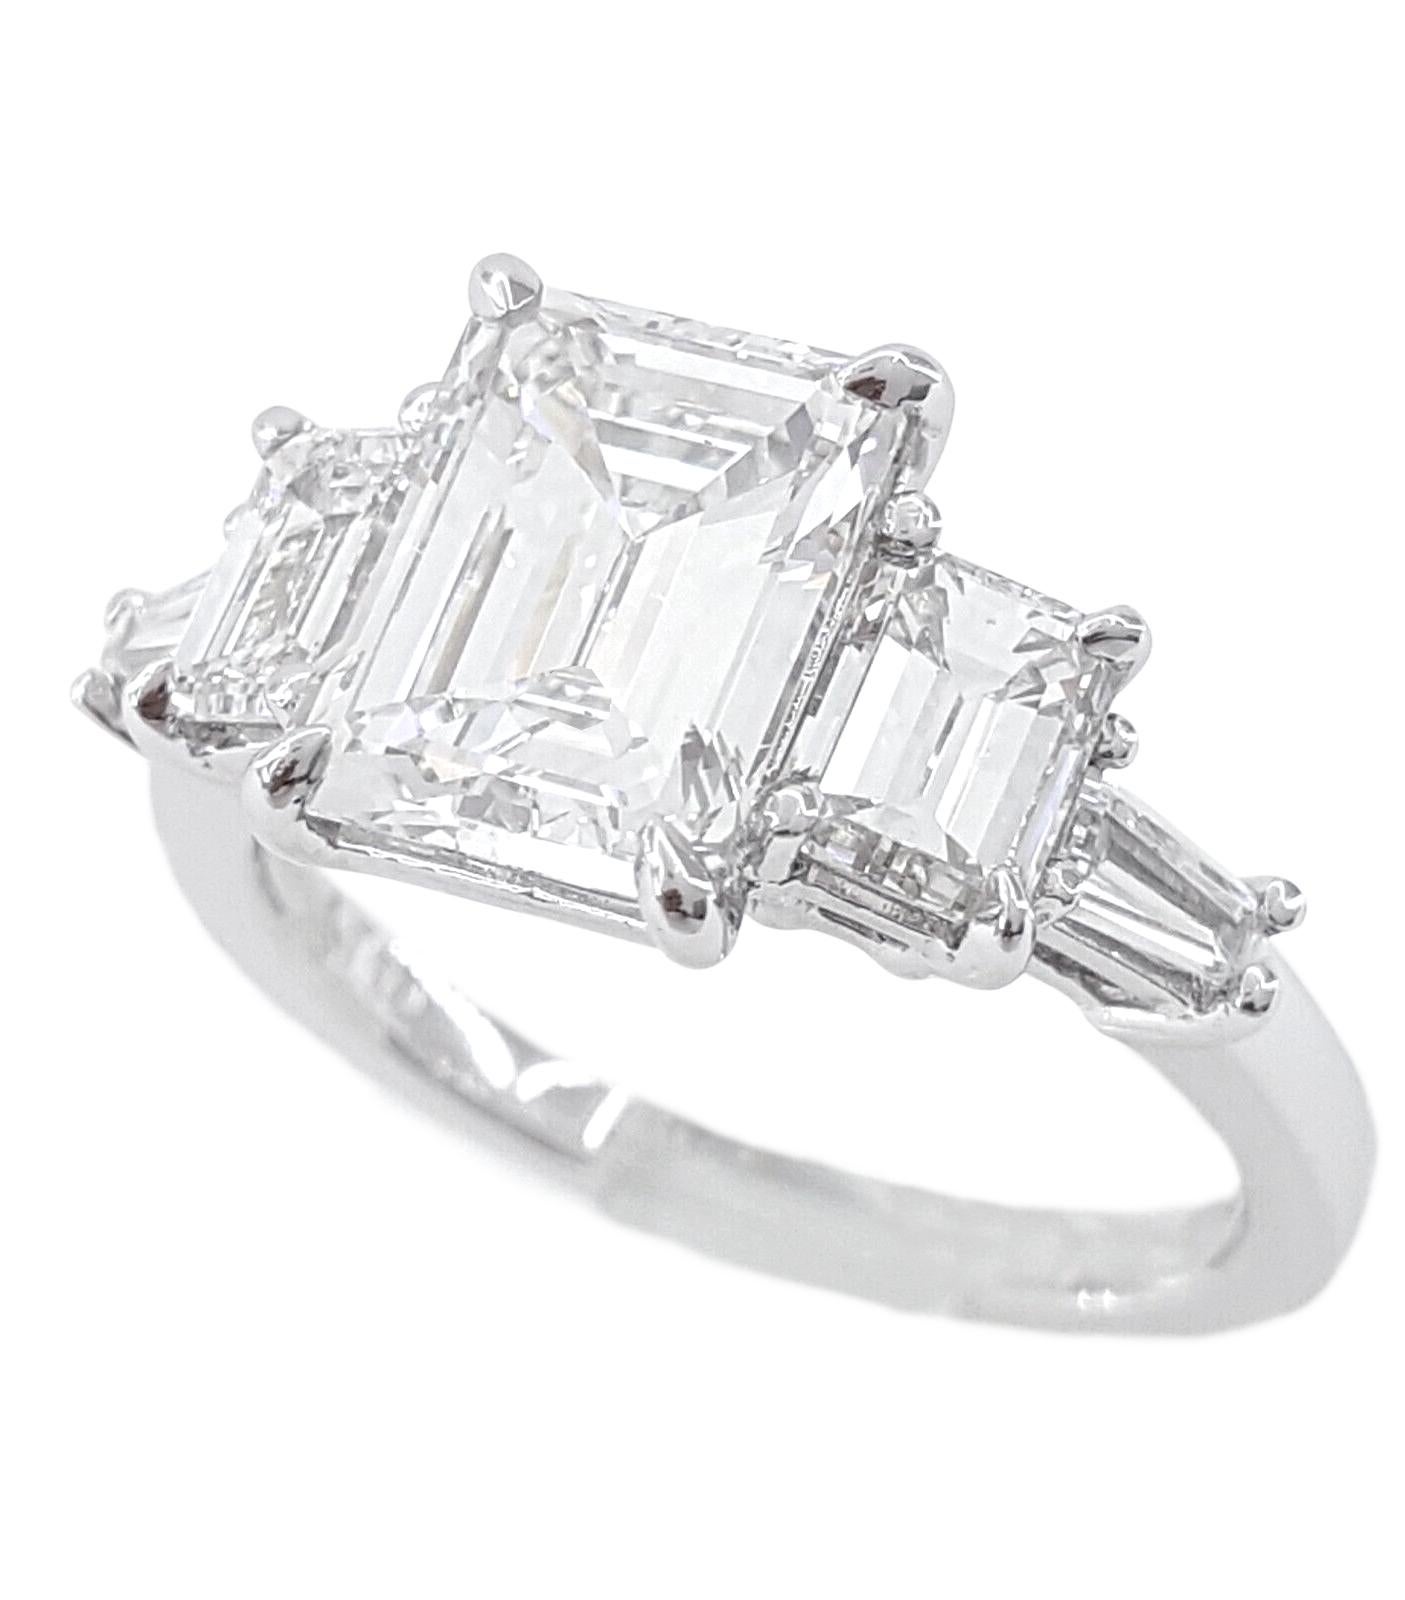 This ring is a refined work of art featuring a 4.00-carat emerald-cut main diamond certified by the GIA as F per color and VS per clarity, set in an 18K white gold band.
The three-stone design imparts a timeless and elegant touch to this